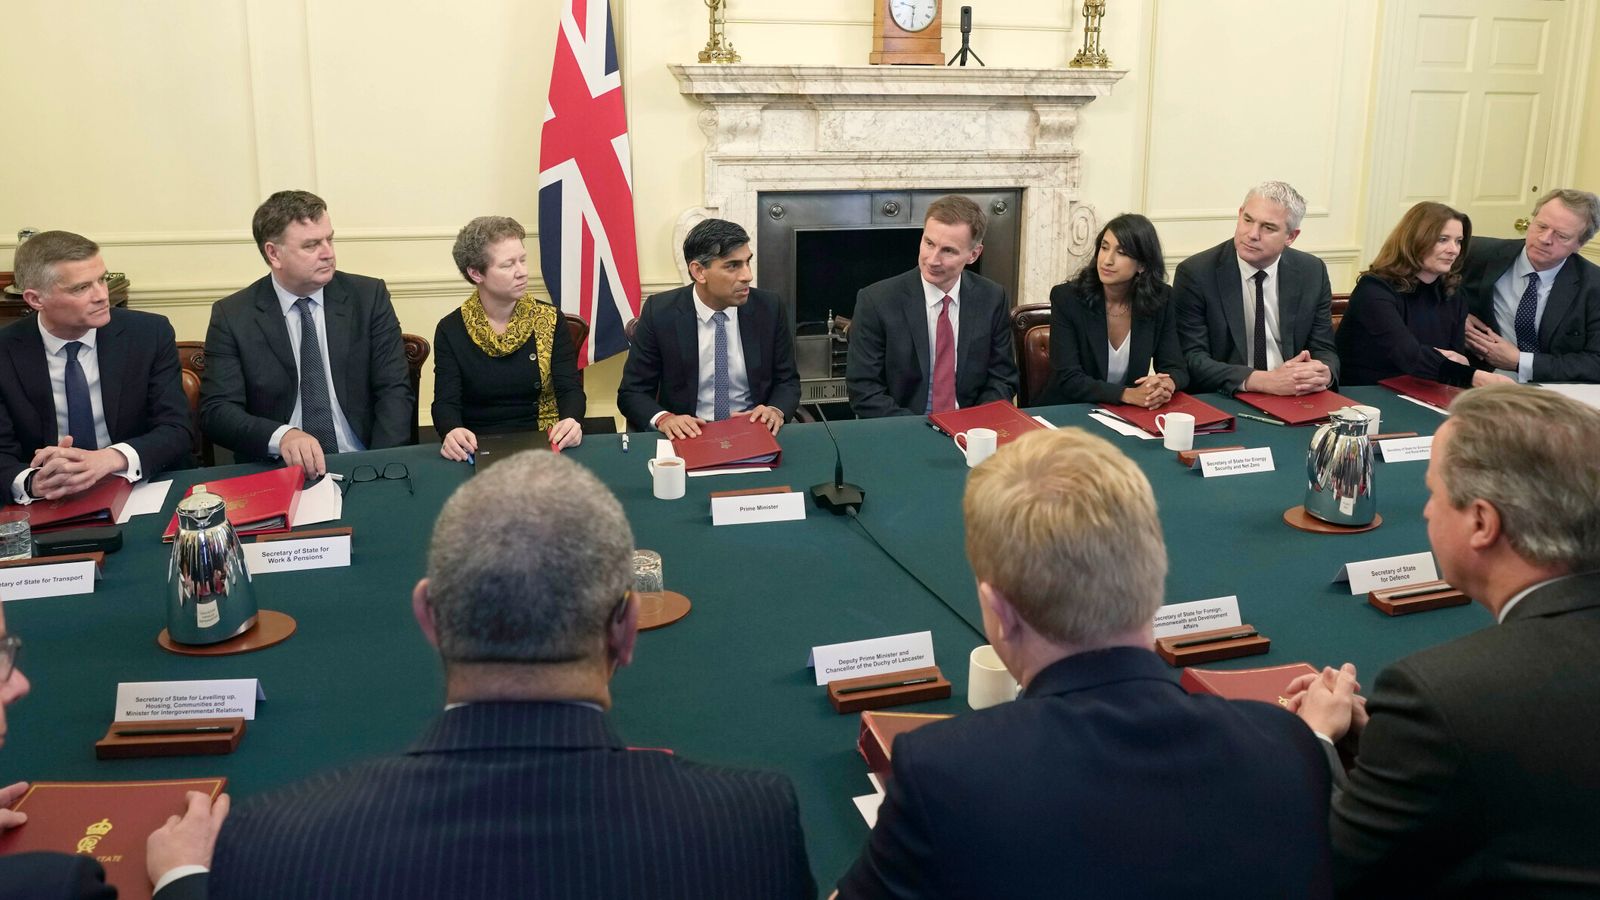 Rishi Sunak welcomes 'strong and united' cabinet after sacking Suella Braverman - as Cameron joins top team